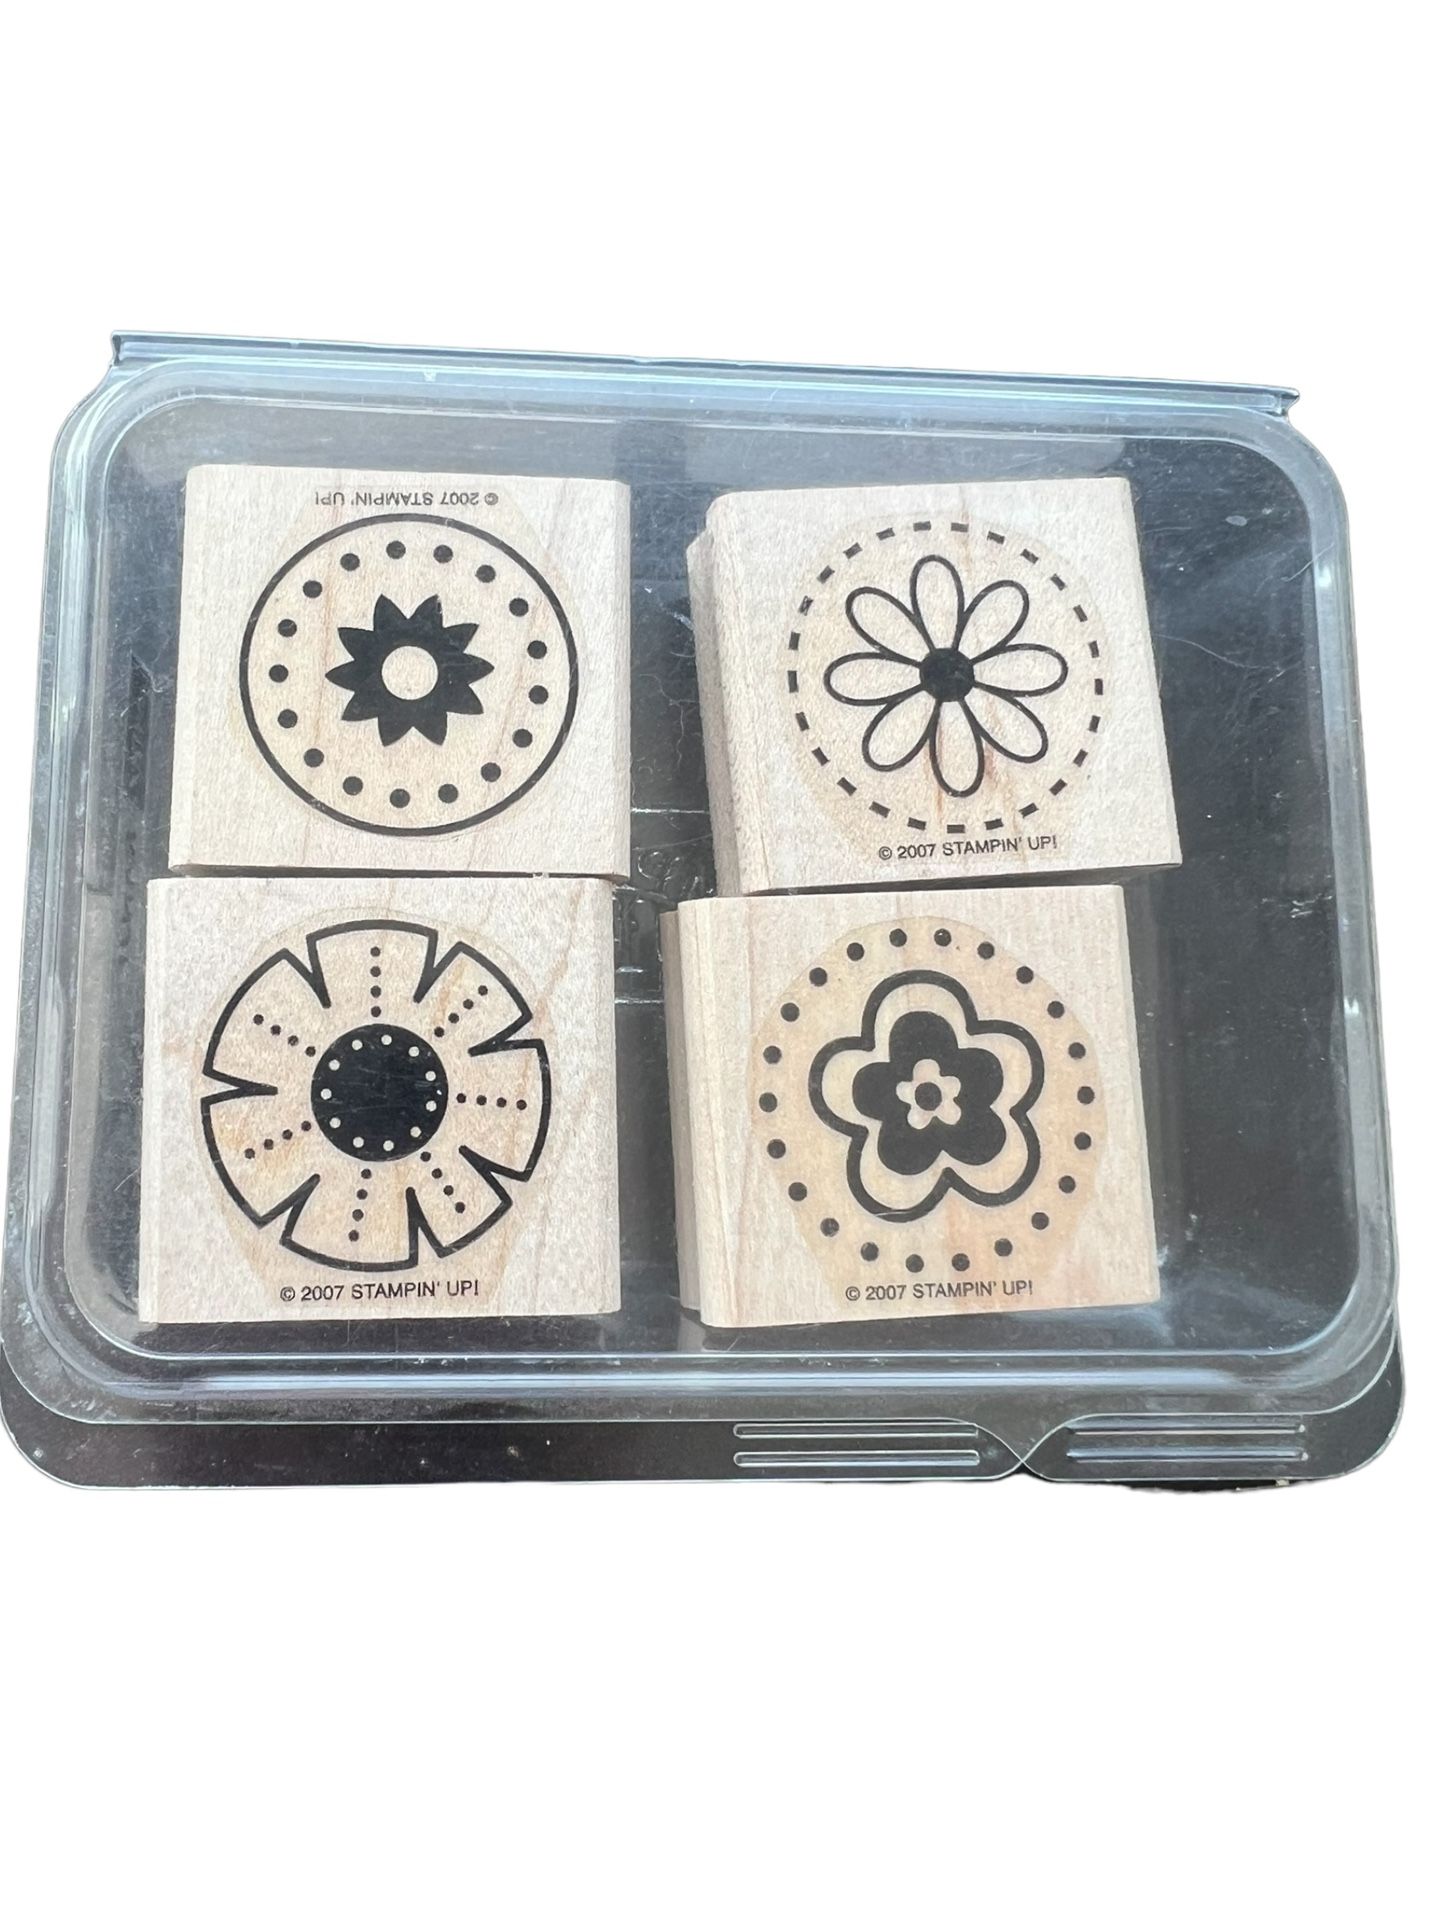 STAMPIN UP POLKA DOT PUNCHES SET OF 4 WOOD MOUNTED RUBBER STAMPS FLOWERS Vintage